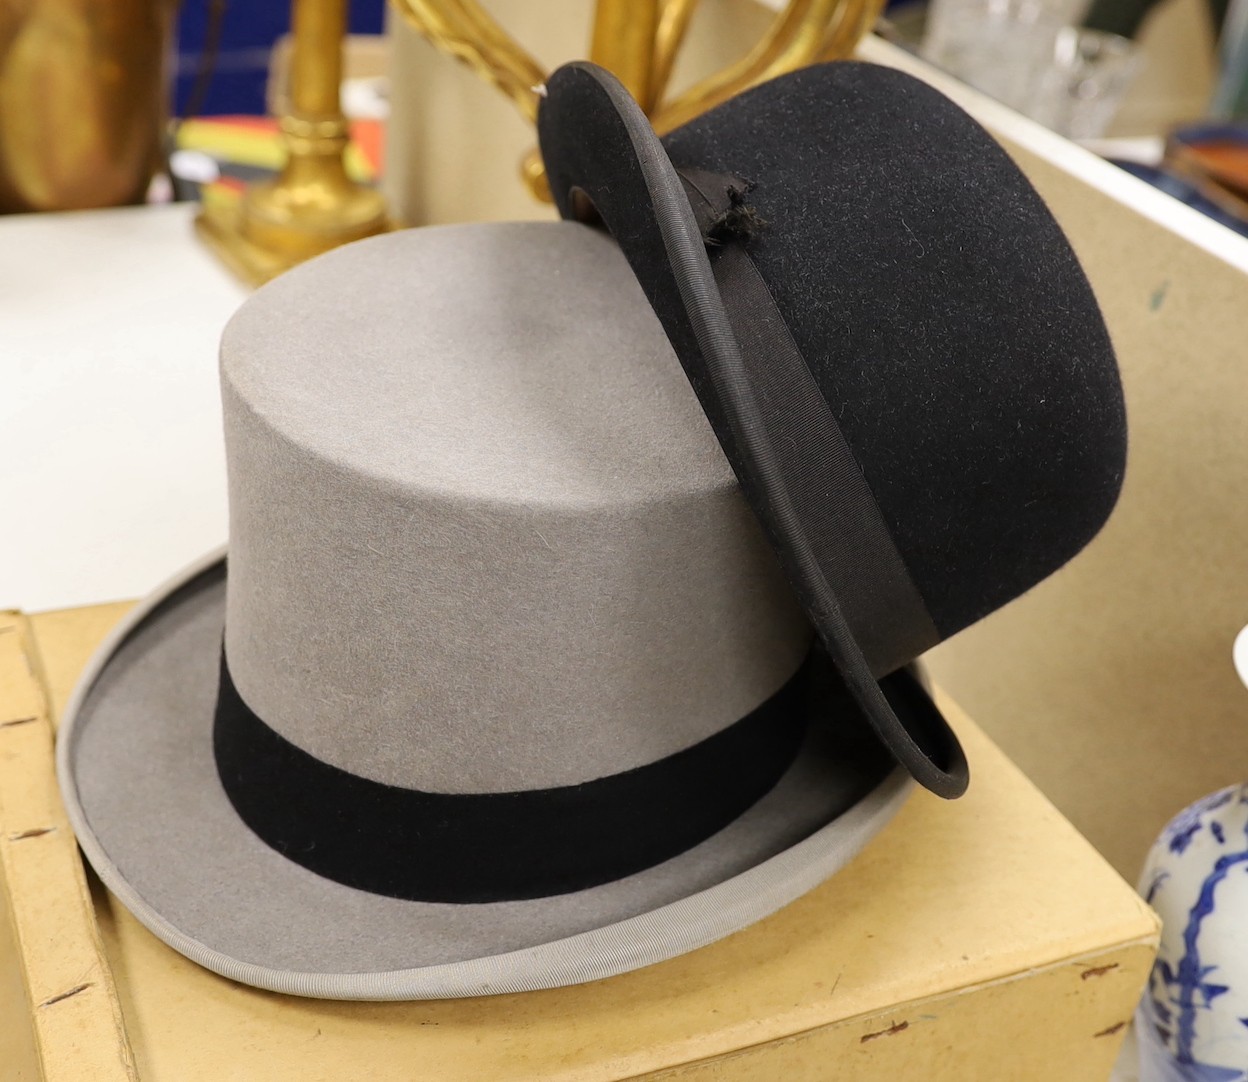 An Austin Reed boxed grey top hat together with a black bowler hat